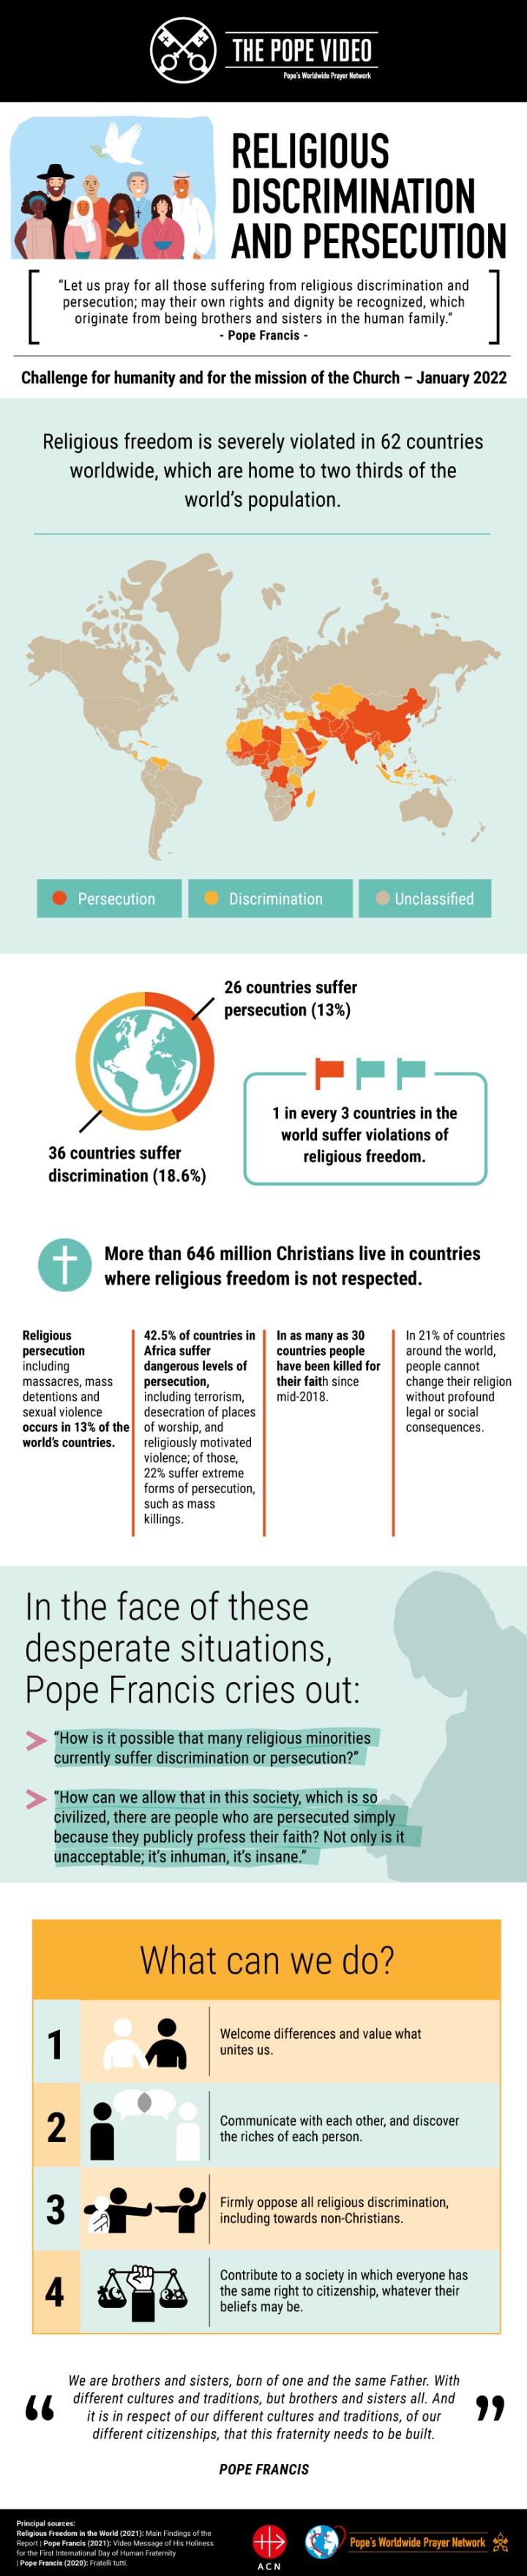 Infographic-TPV-1-2022-EN-Religious-discrimination-and-persecution.jpg